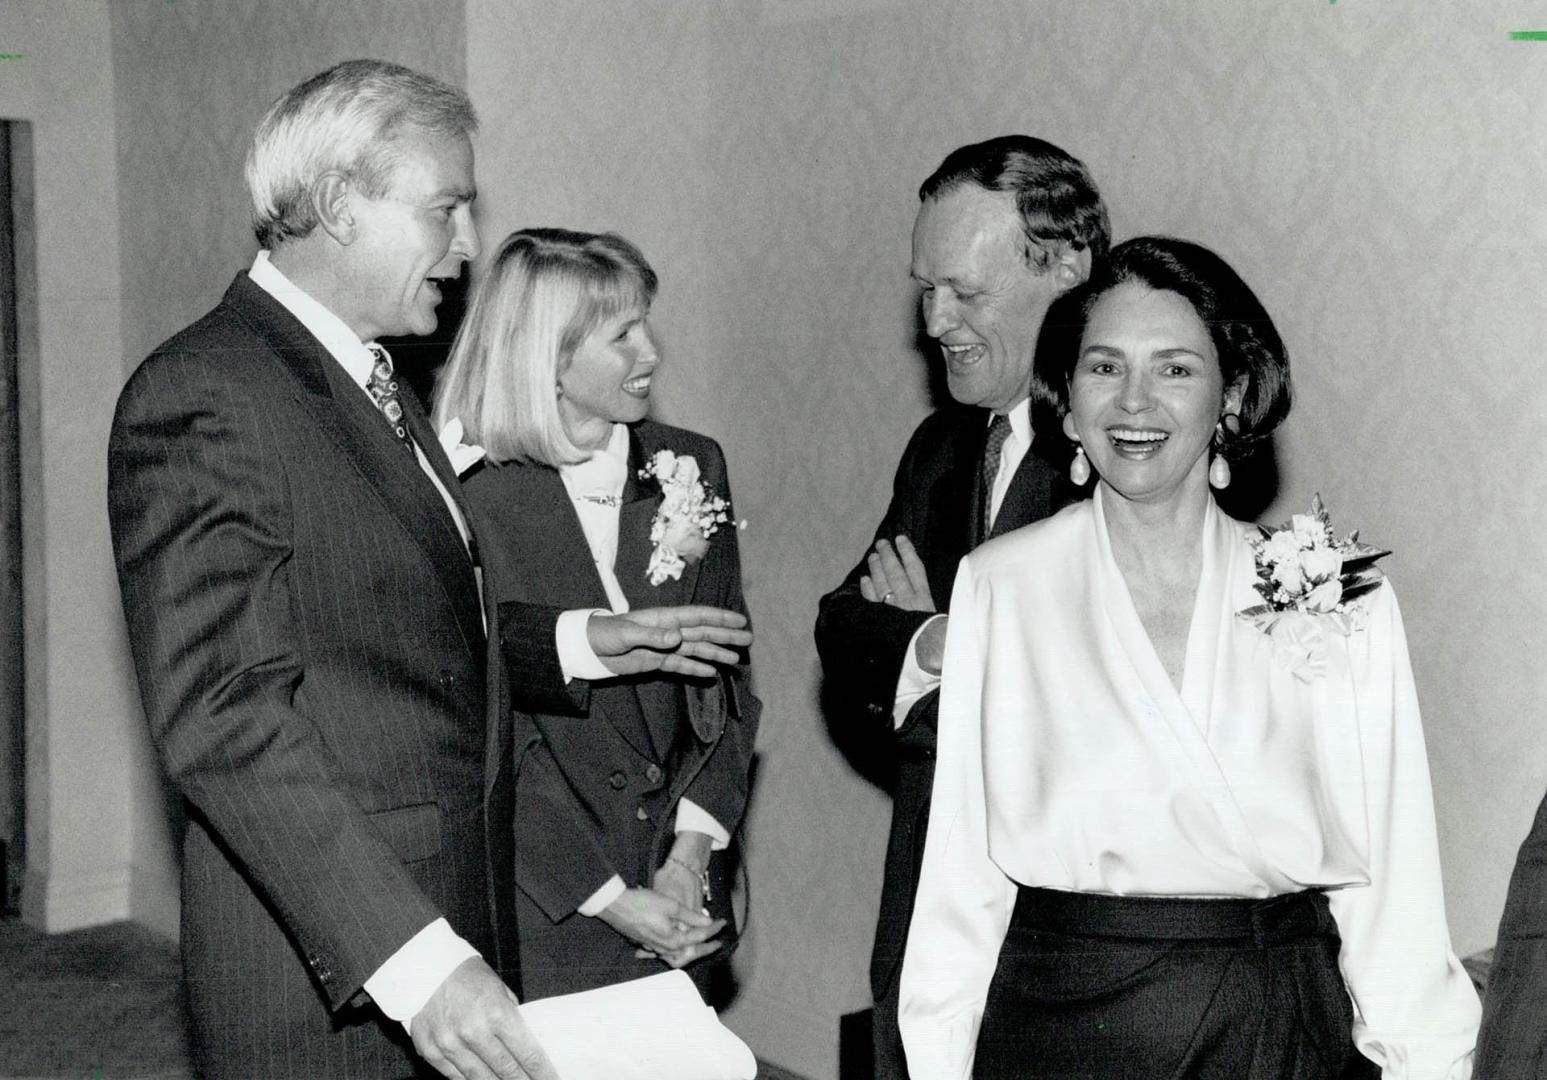 Liberal line-up: Former Ontario premier David Peterson and wife Shelley chat with Liberal Leader Jean Chretien and wife Aline at Sheraton Centre last night